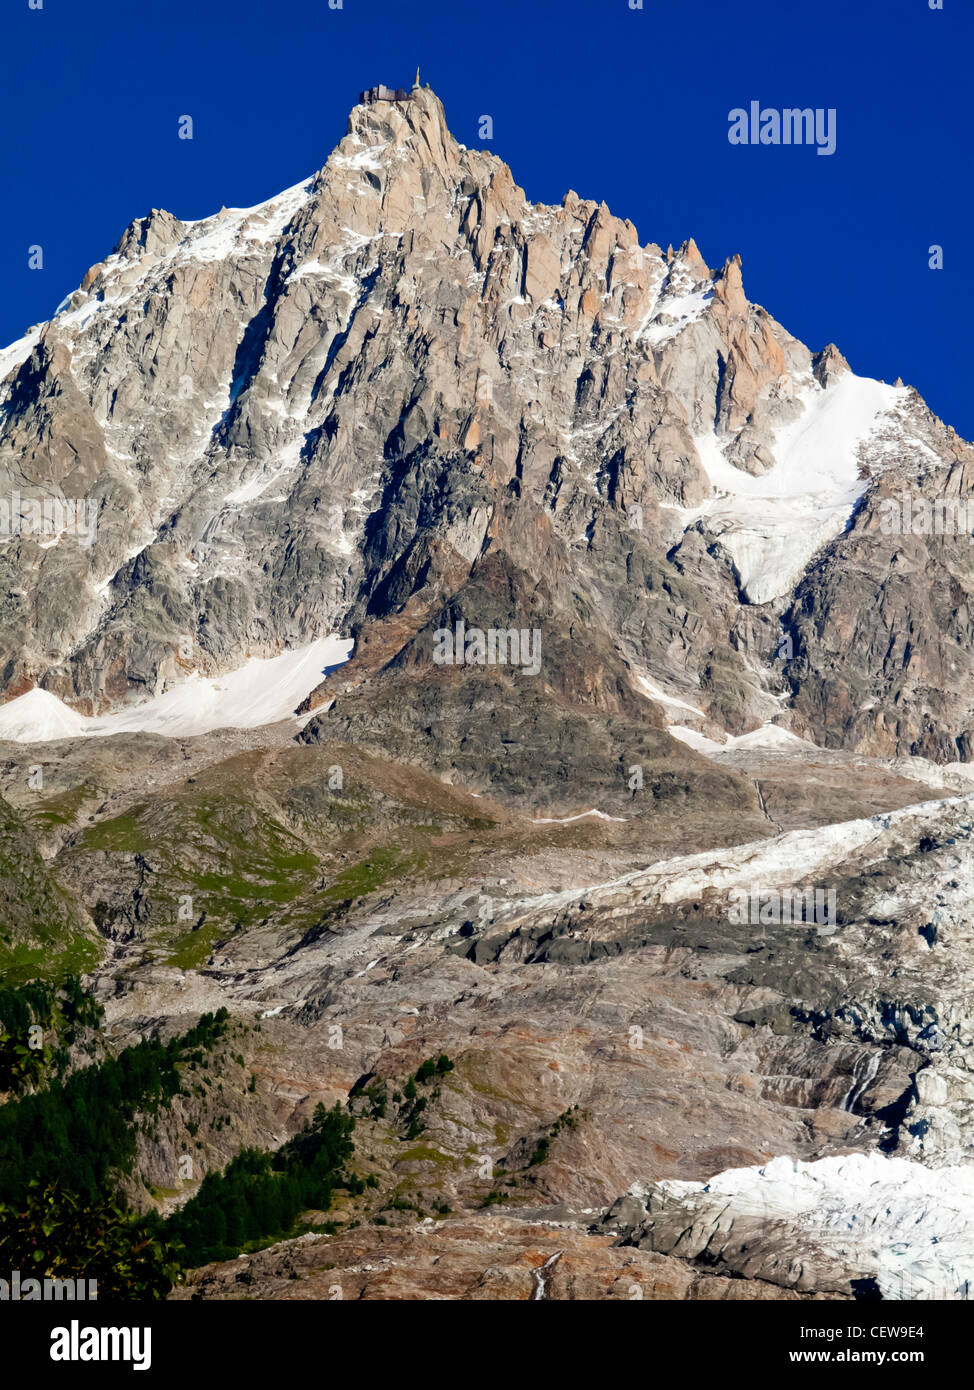 The summit of Aiguille du Midi adjacent to Mont Blanc viewed from Bossons near Chamonix in the Savoie region of the French Alps Stock Photo